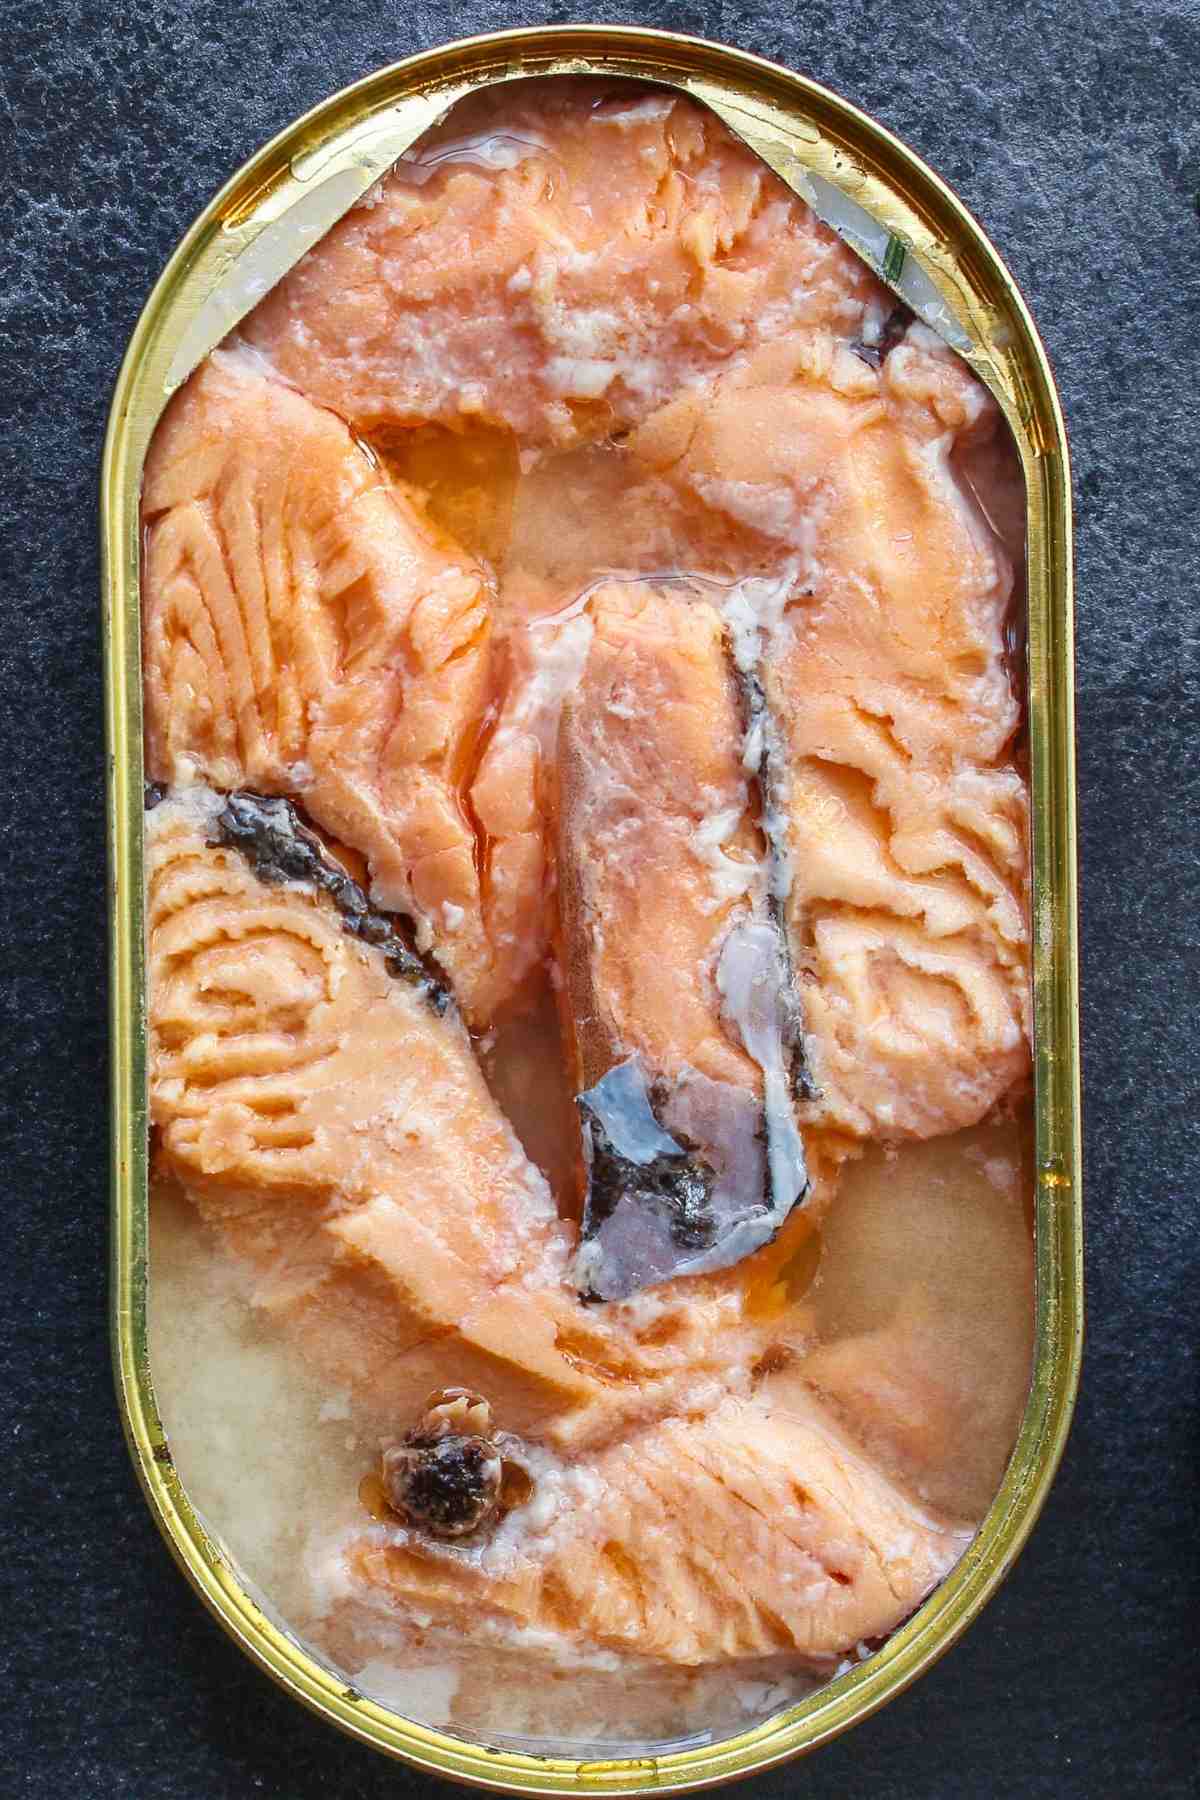 Want to save time and eat healthy too? Here are 15 Best Canned Salmon Recipes to turn this versatile protein into something delicious! From fresh salmon salad to hearty sandwiches, to creamy salmon dips, these recipes are super easy to prepare at home.